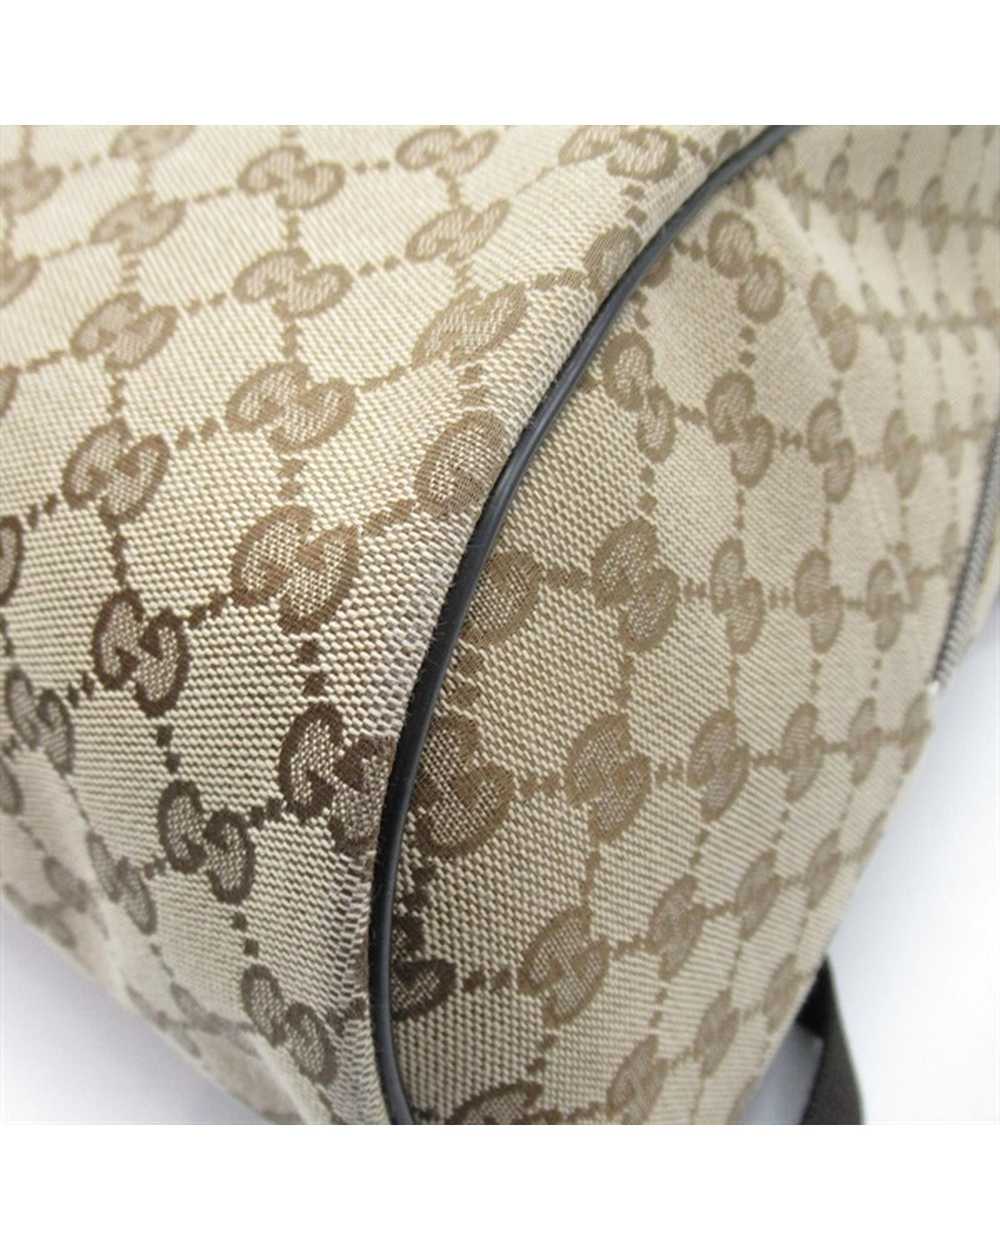 Gucci Canvas Backpack in Brown with GG Pattern - … - image 8